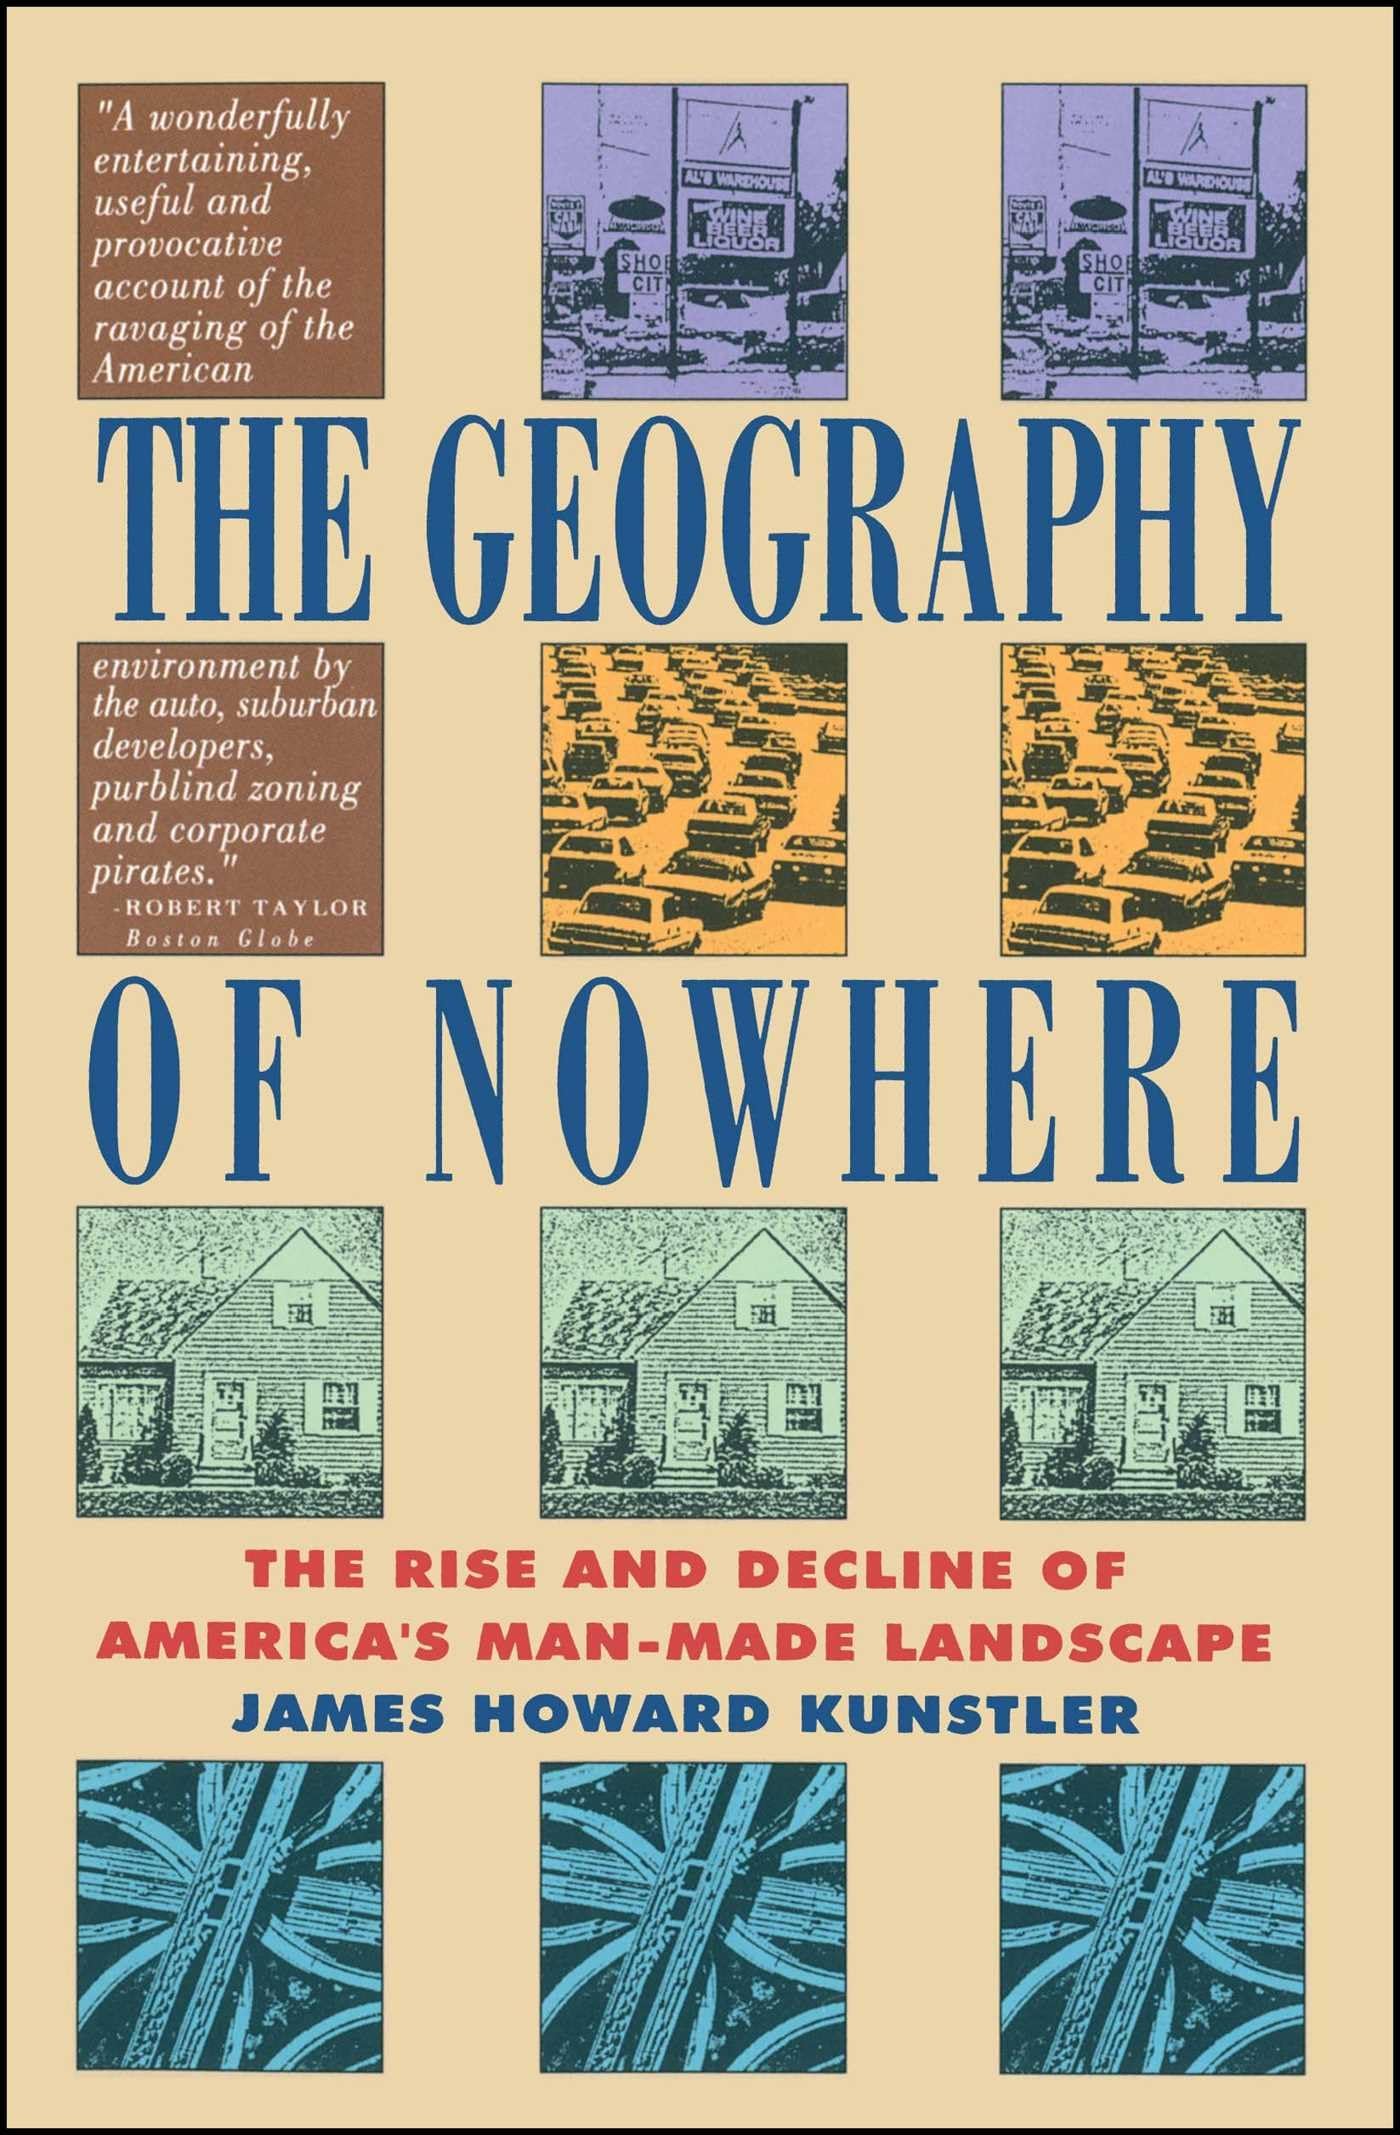 Geography of Nowhere: The Rise and Declineof America's Man-Made Landscape